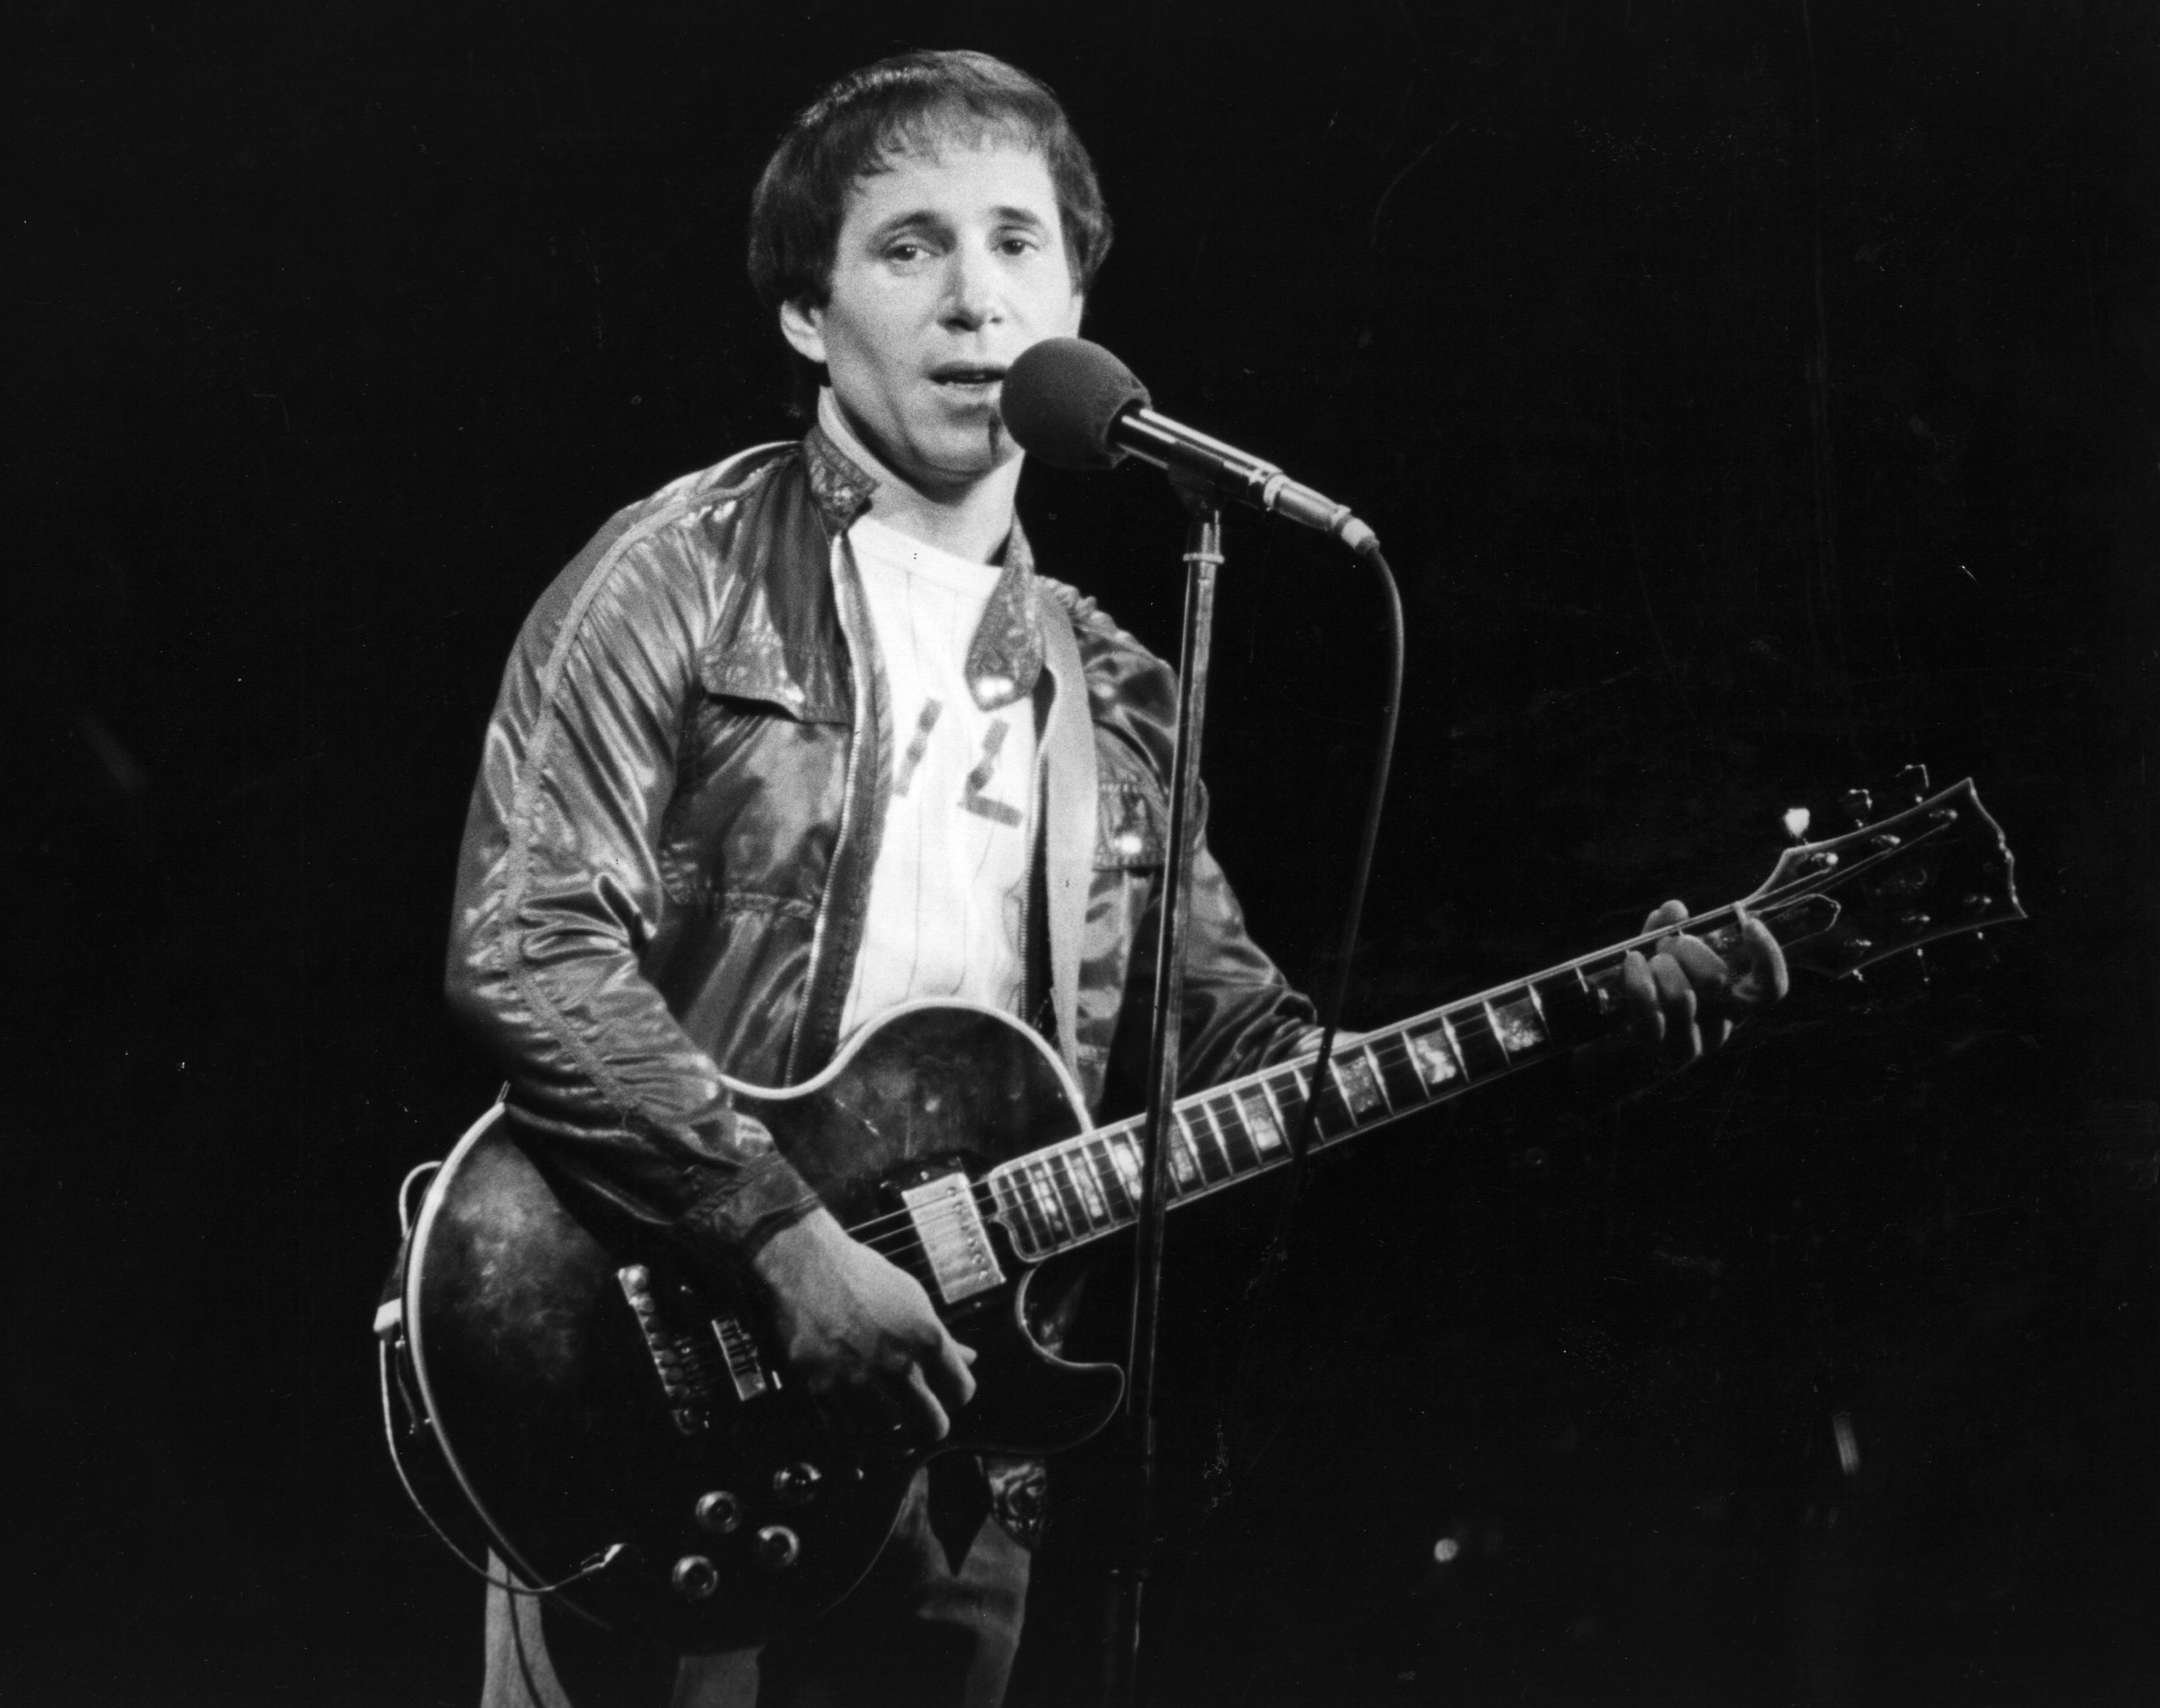 Paul Simon with a microphone and a guitar